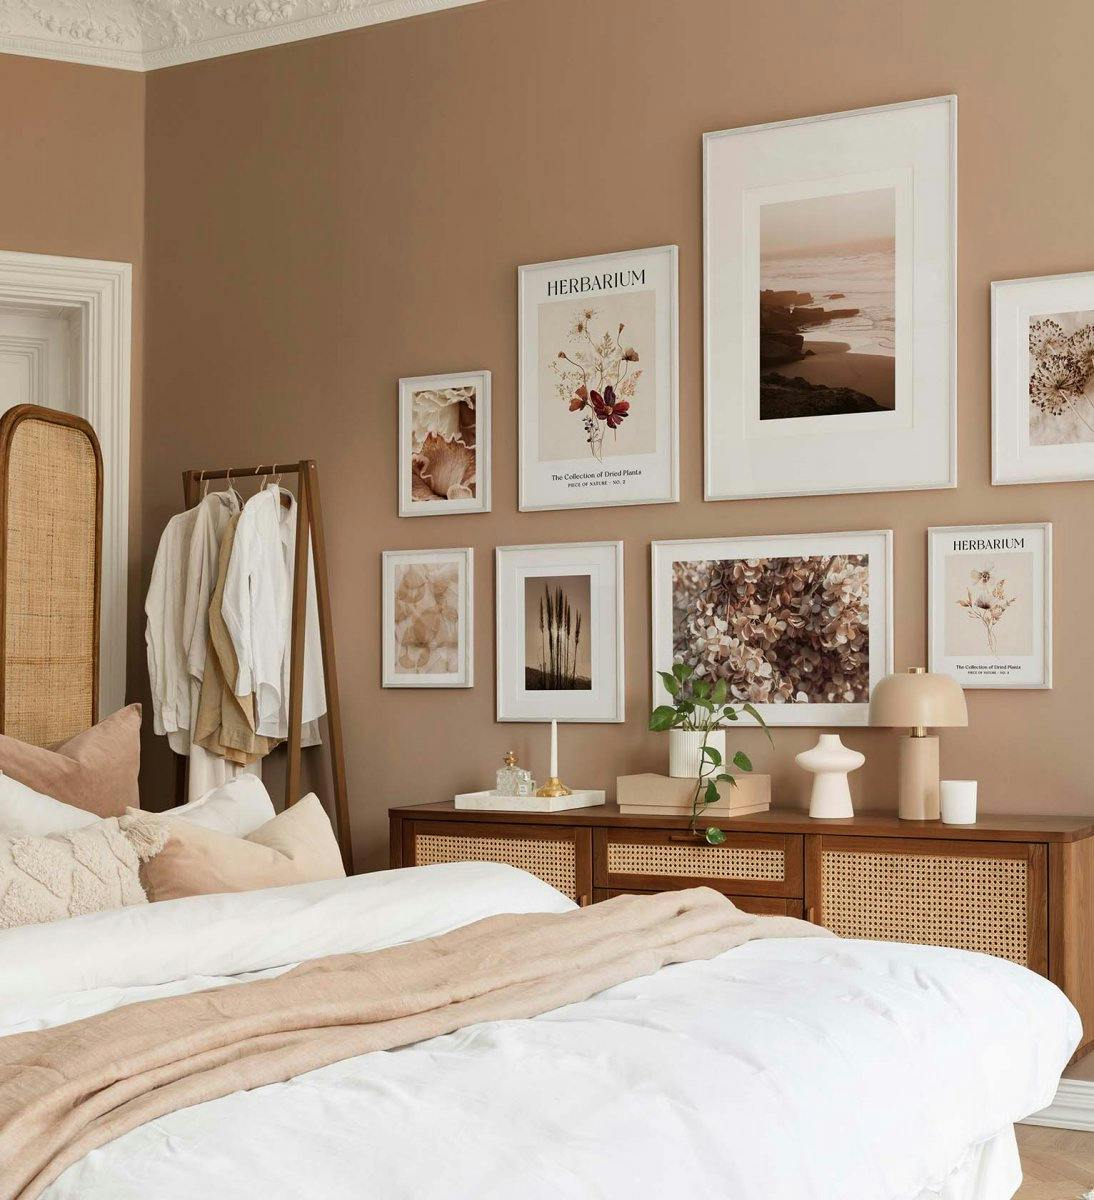 Botanical and close to nature gallery wall in brown and beige colours with white wooden frames for bedroom